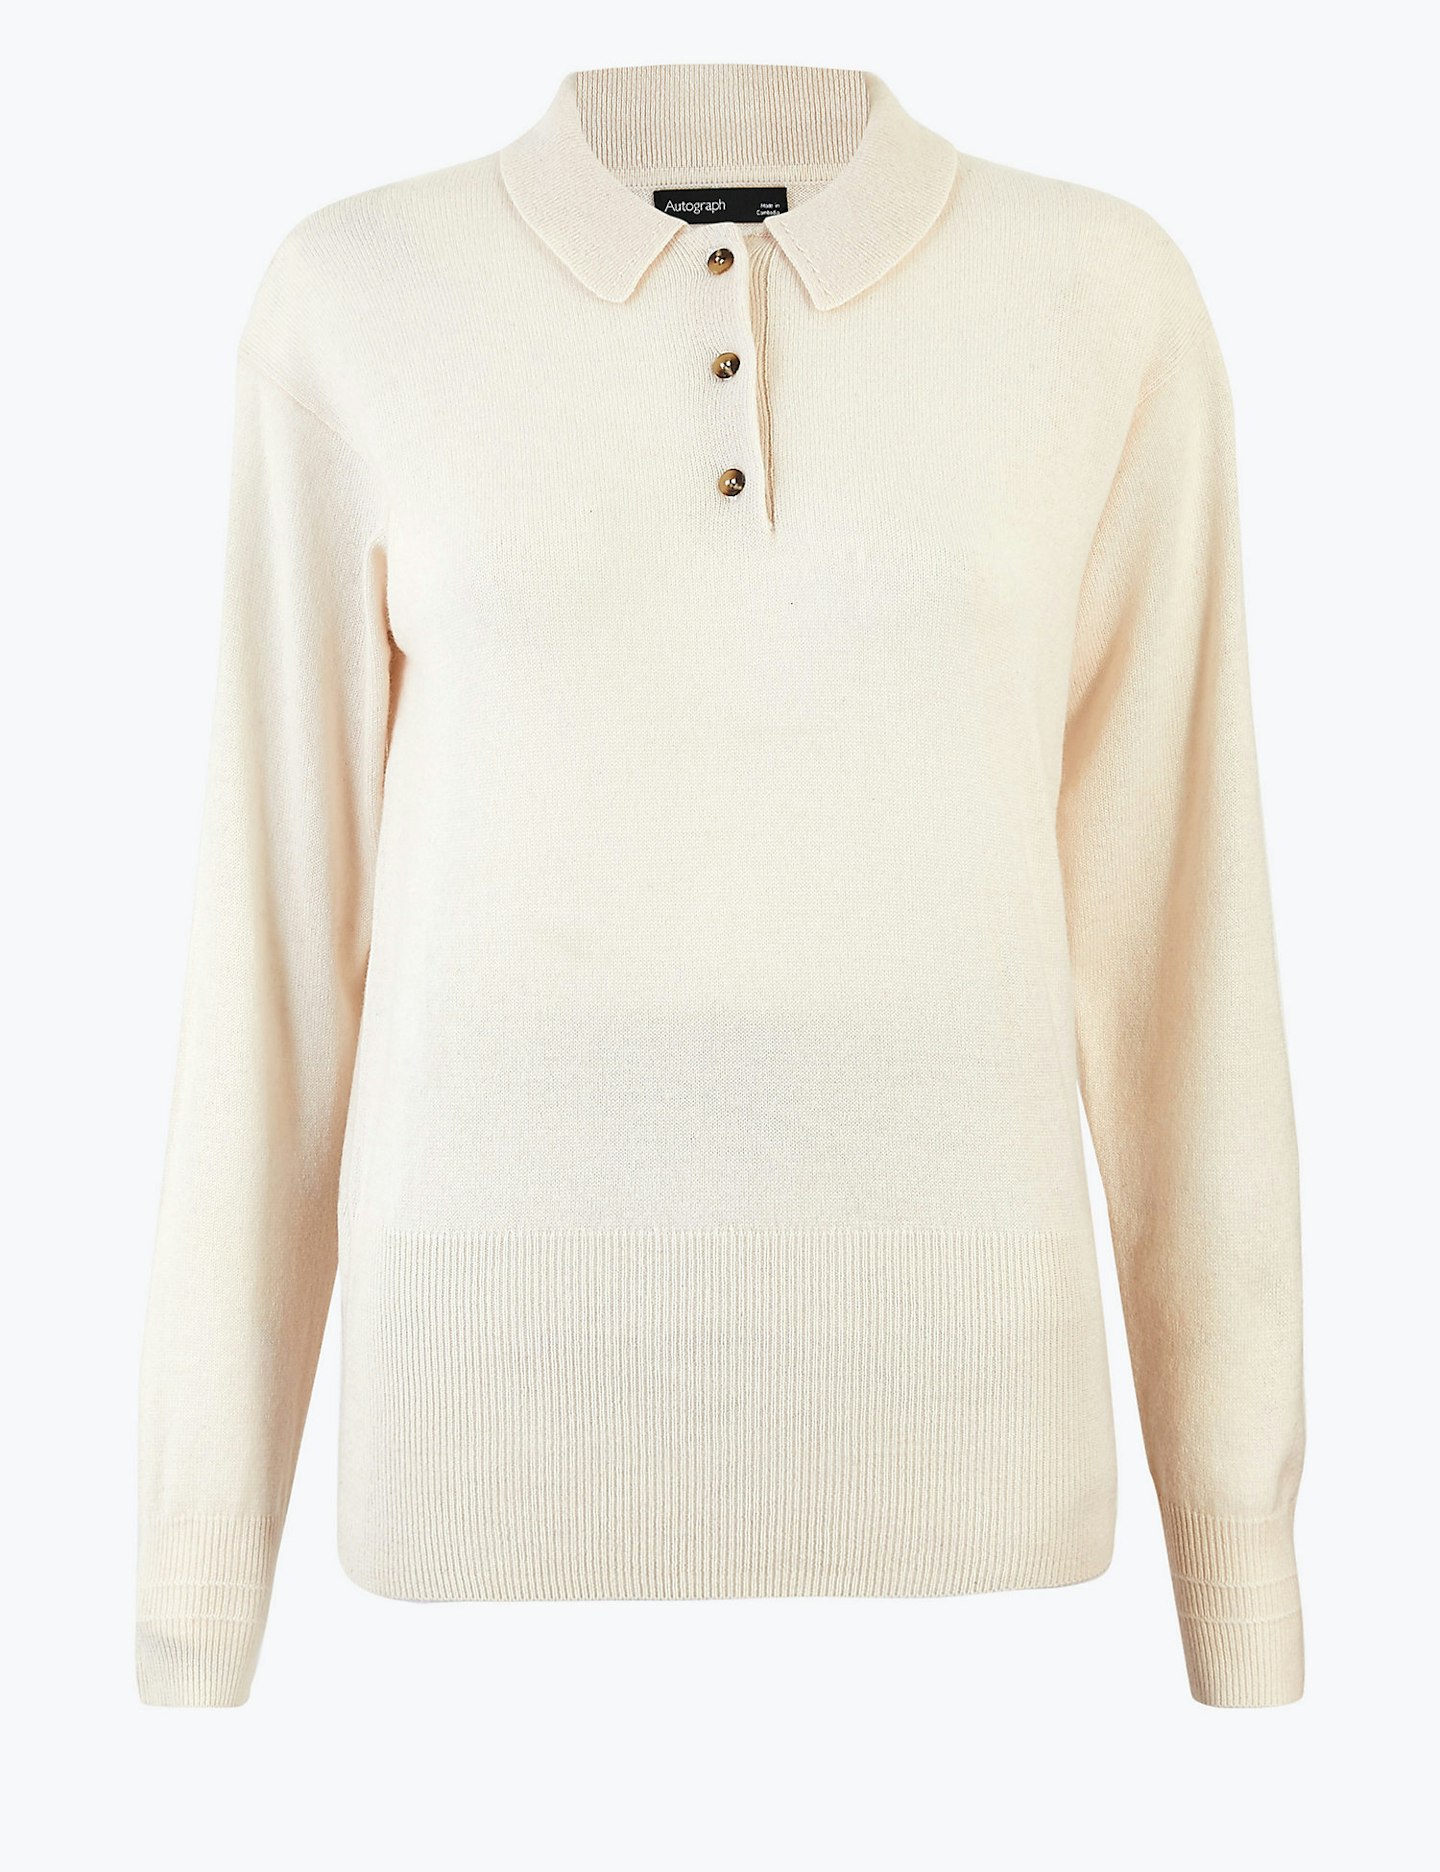 Autograph, Knitted Polo Shirt,  £69